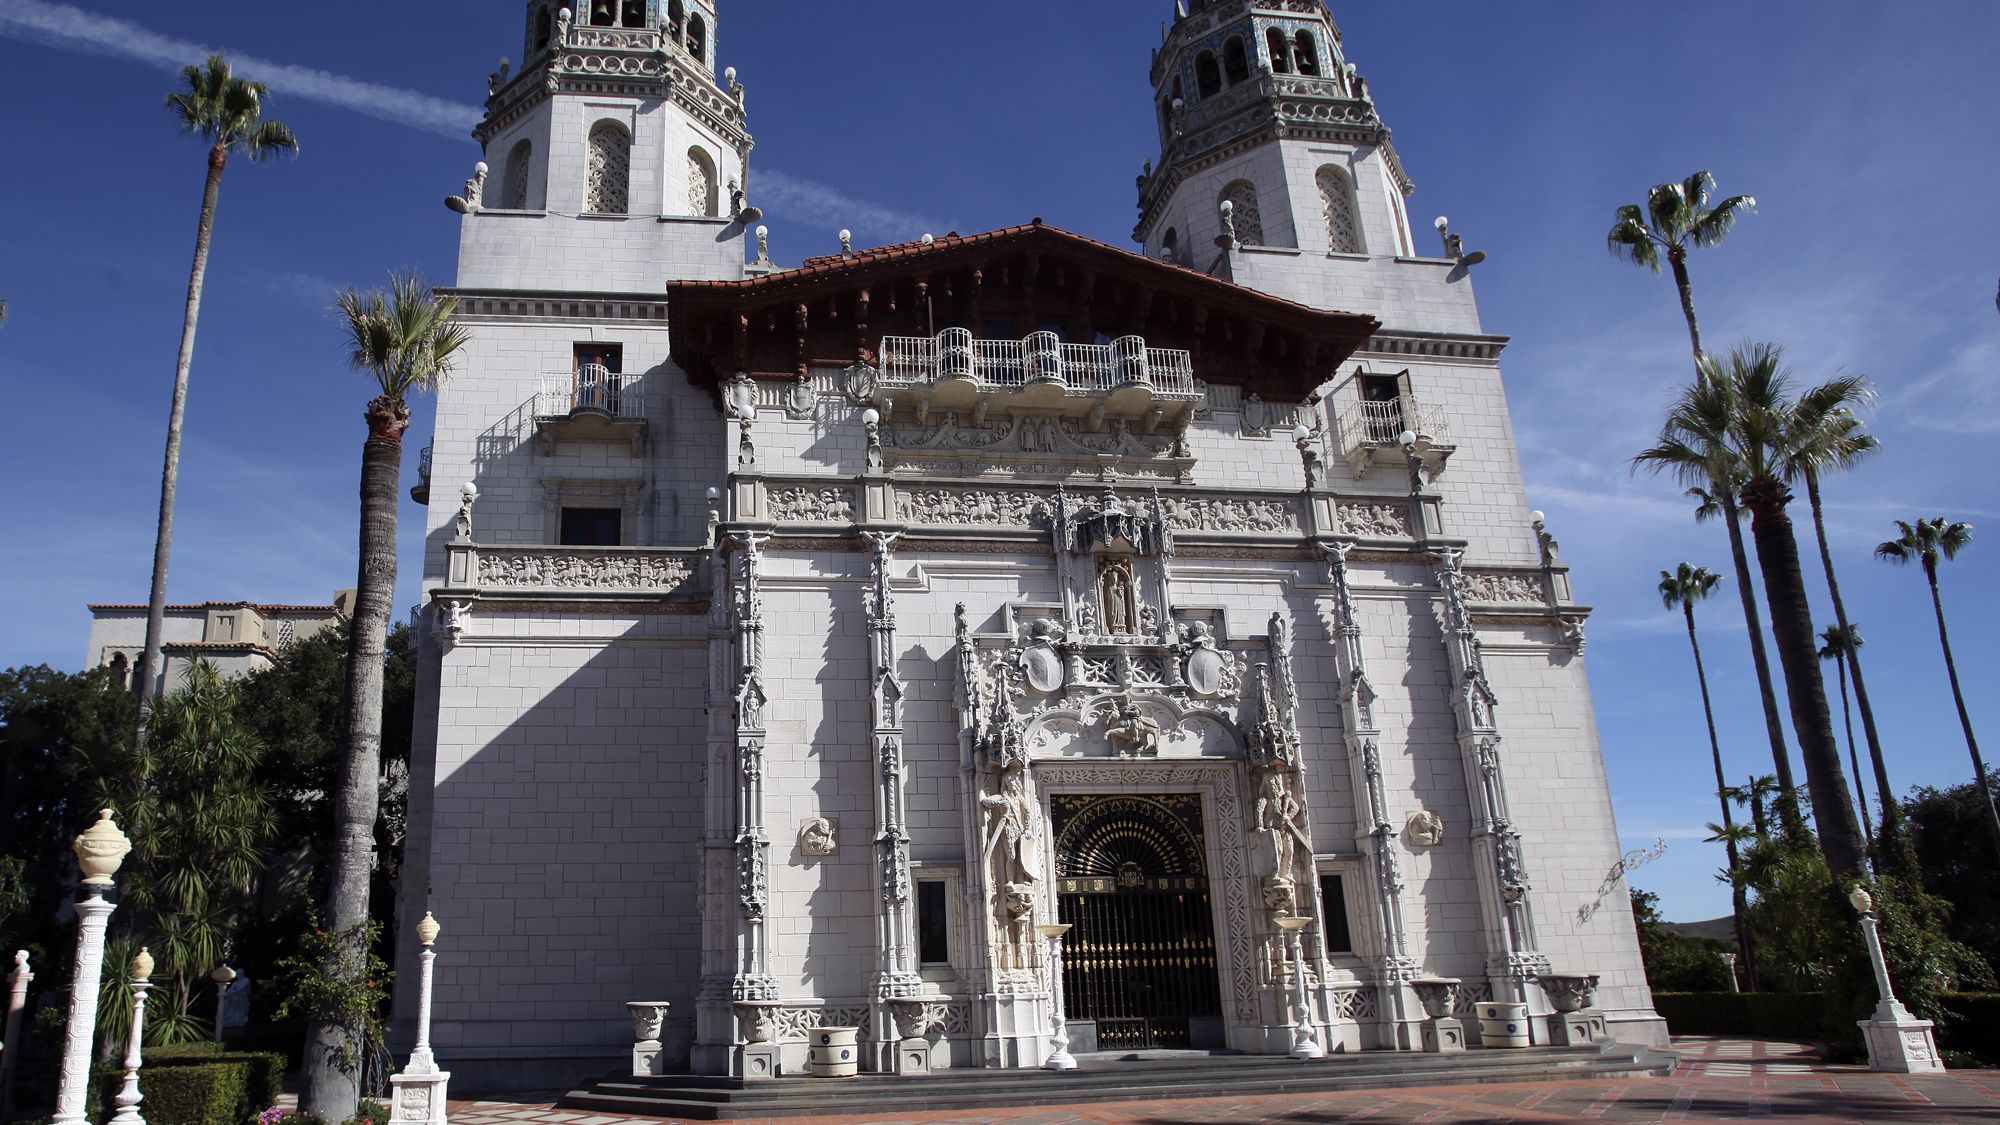 Hearst Castle in California with Spanish Mission style architecture makes it one of the most unique castles in the US